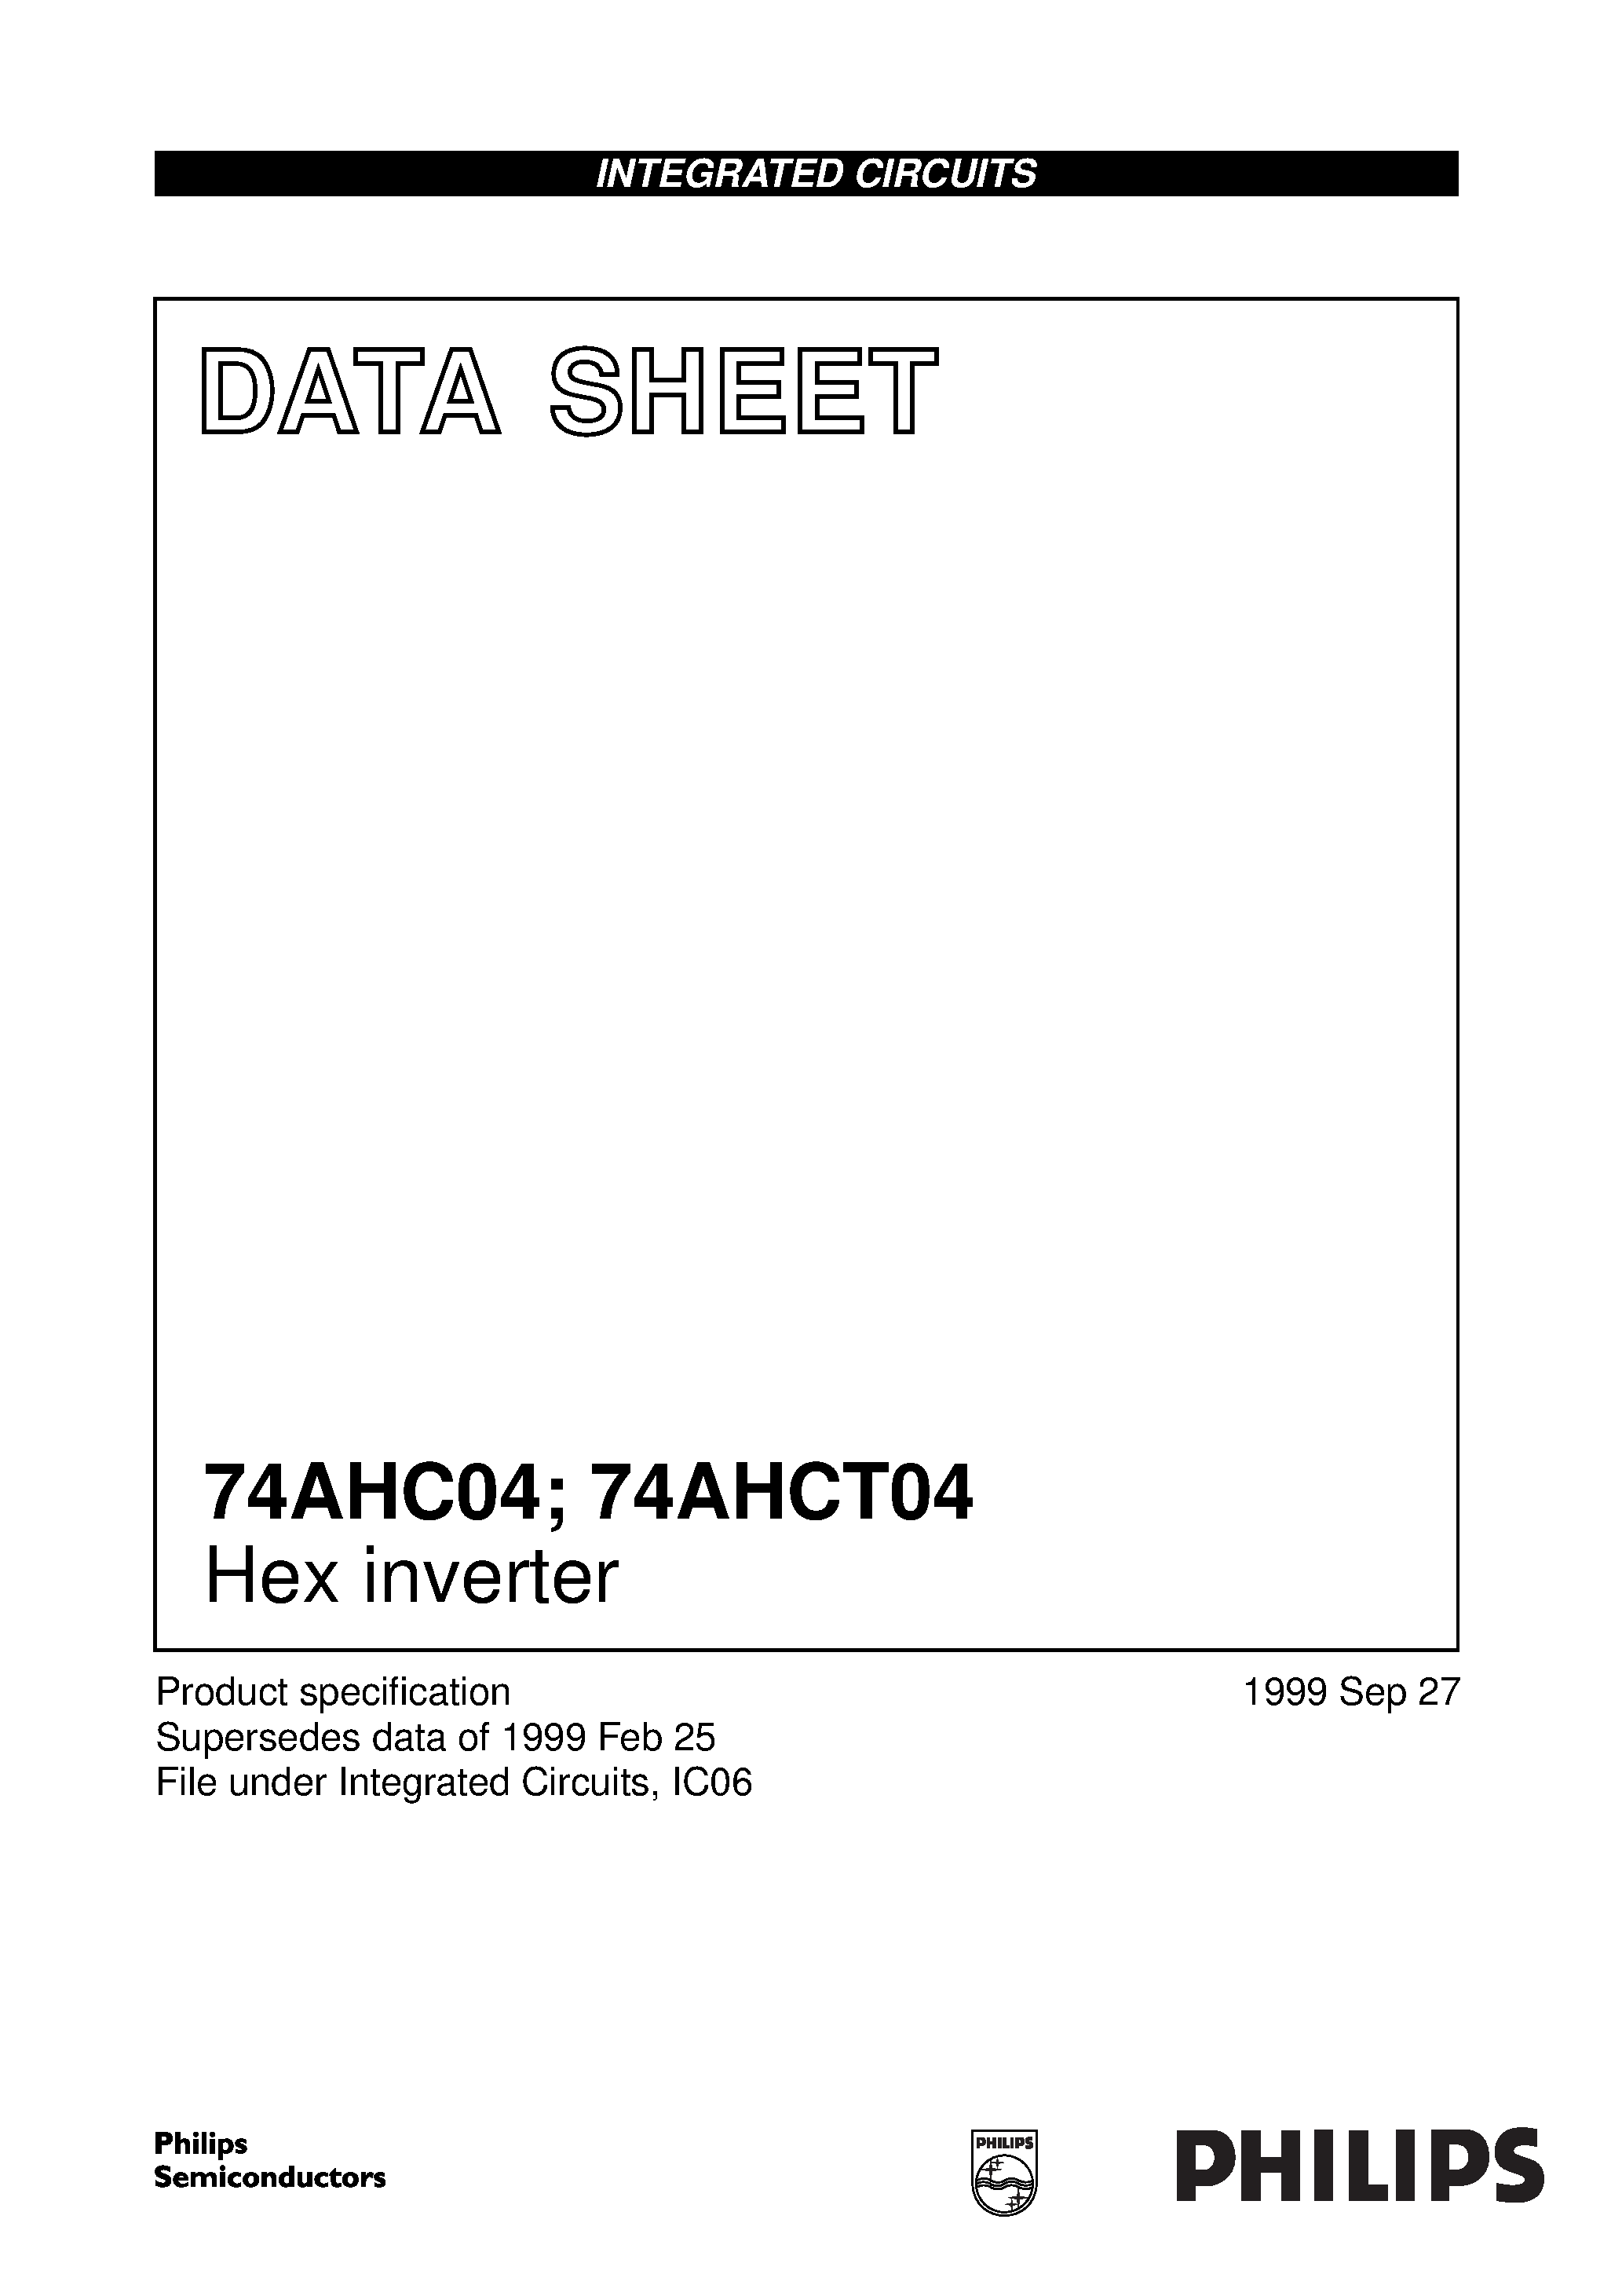 Datasheet 74AHC04D - Hex inverter page 1